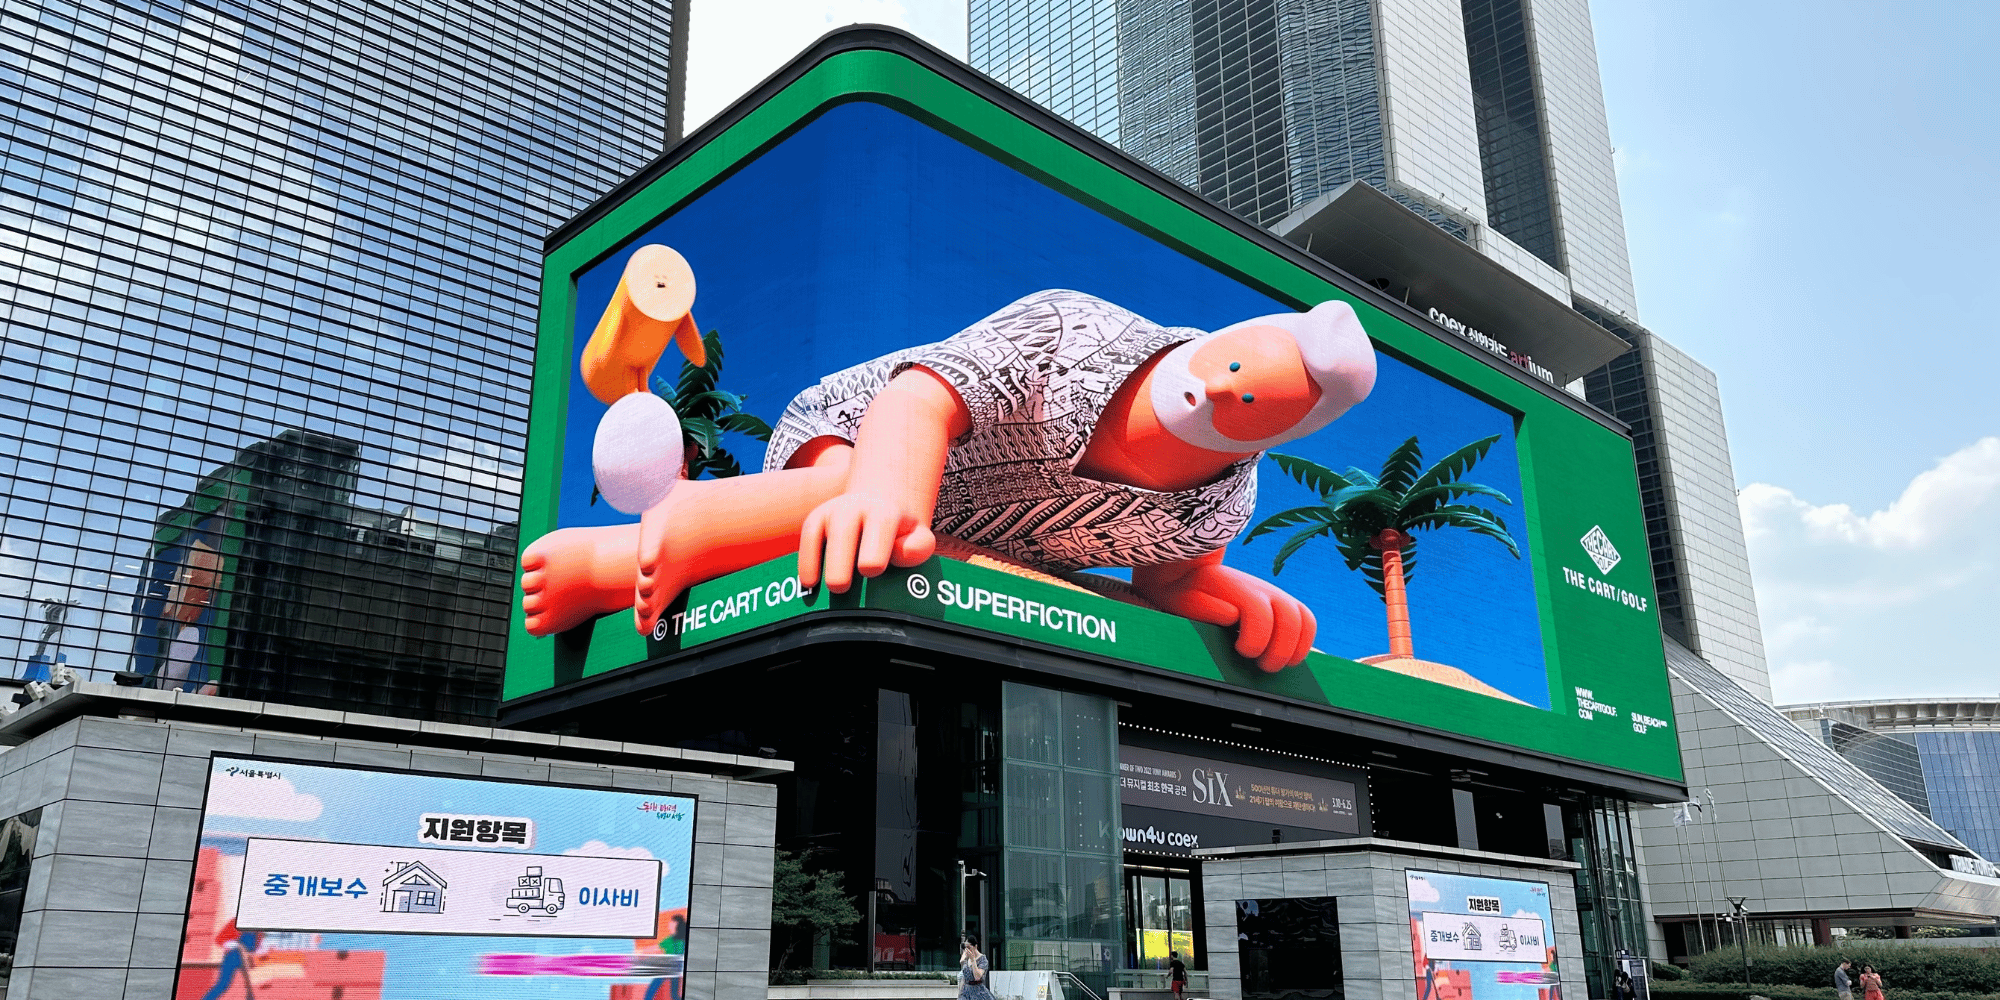 3D Digital Signage: Are 3D Billboards the Future of Advertising?